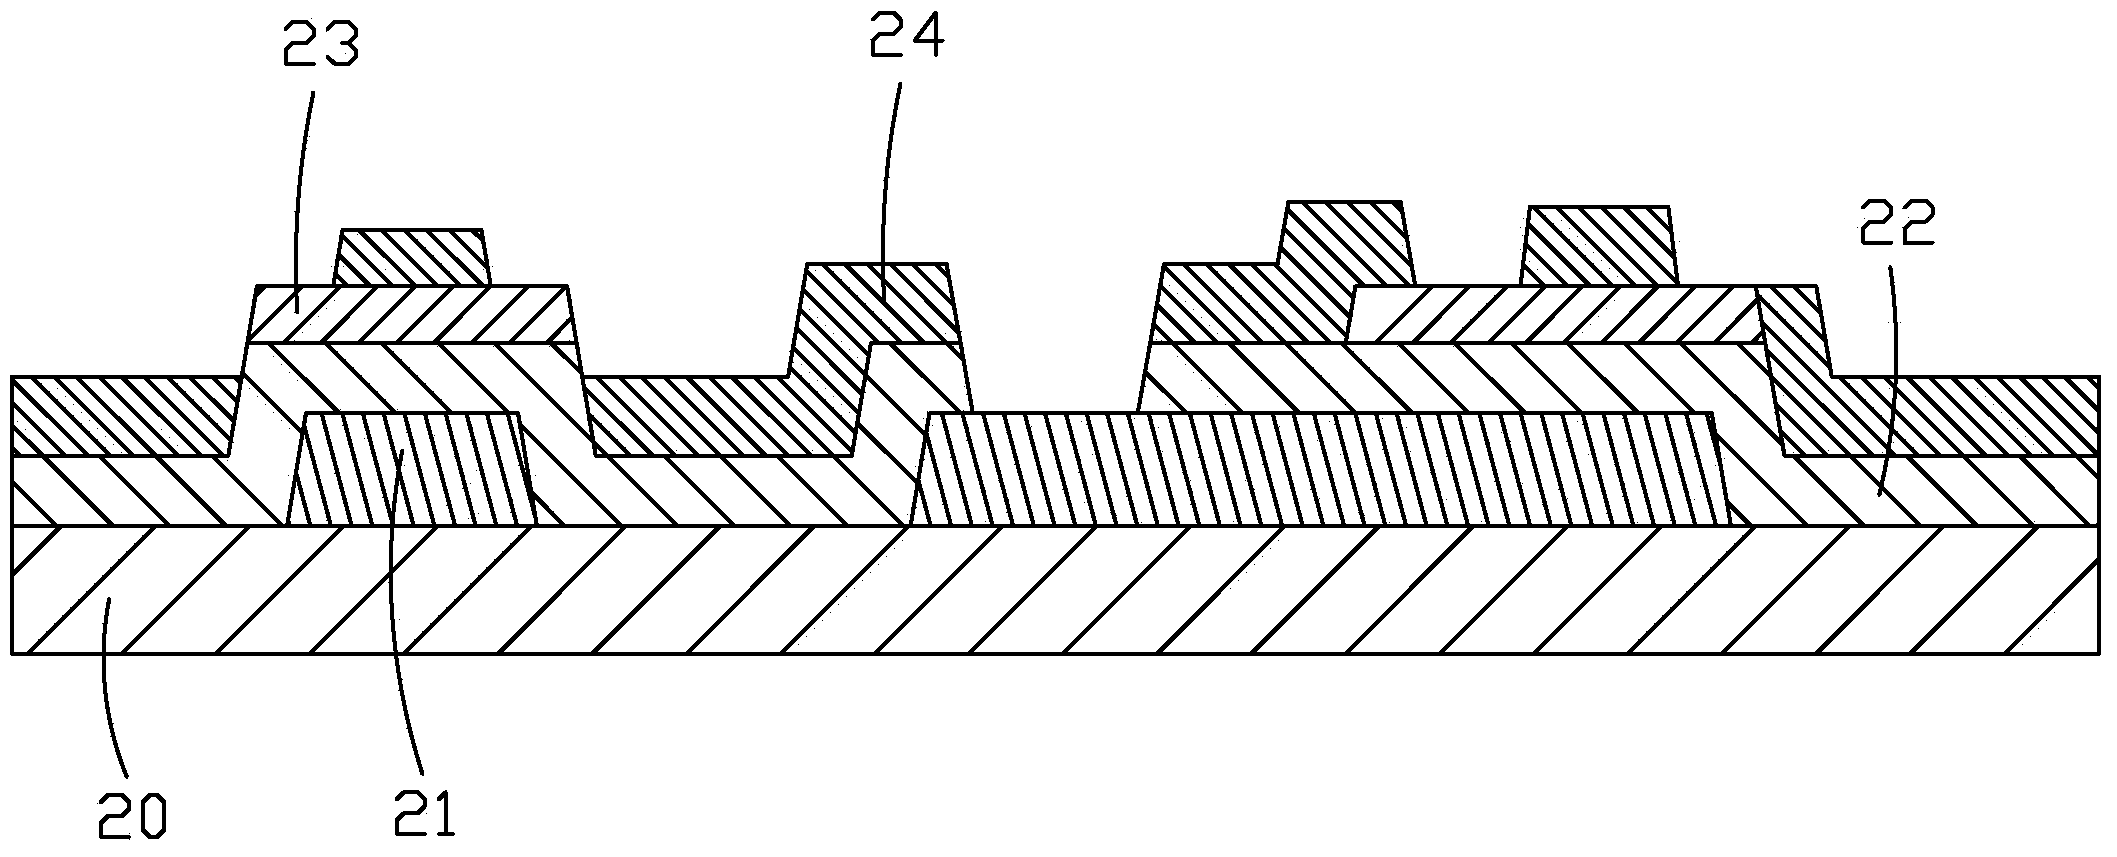 TFT (thin film transistor) backboard manufacturing method and TFT backboard structure